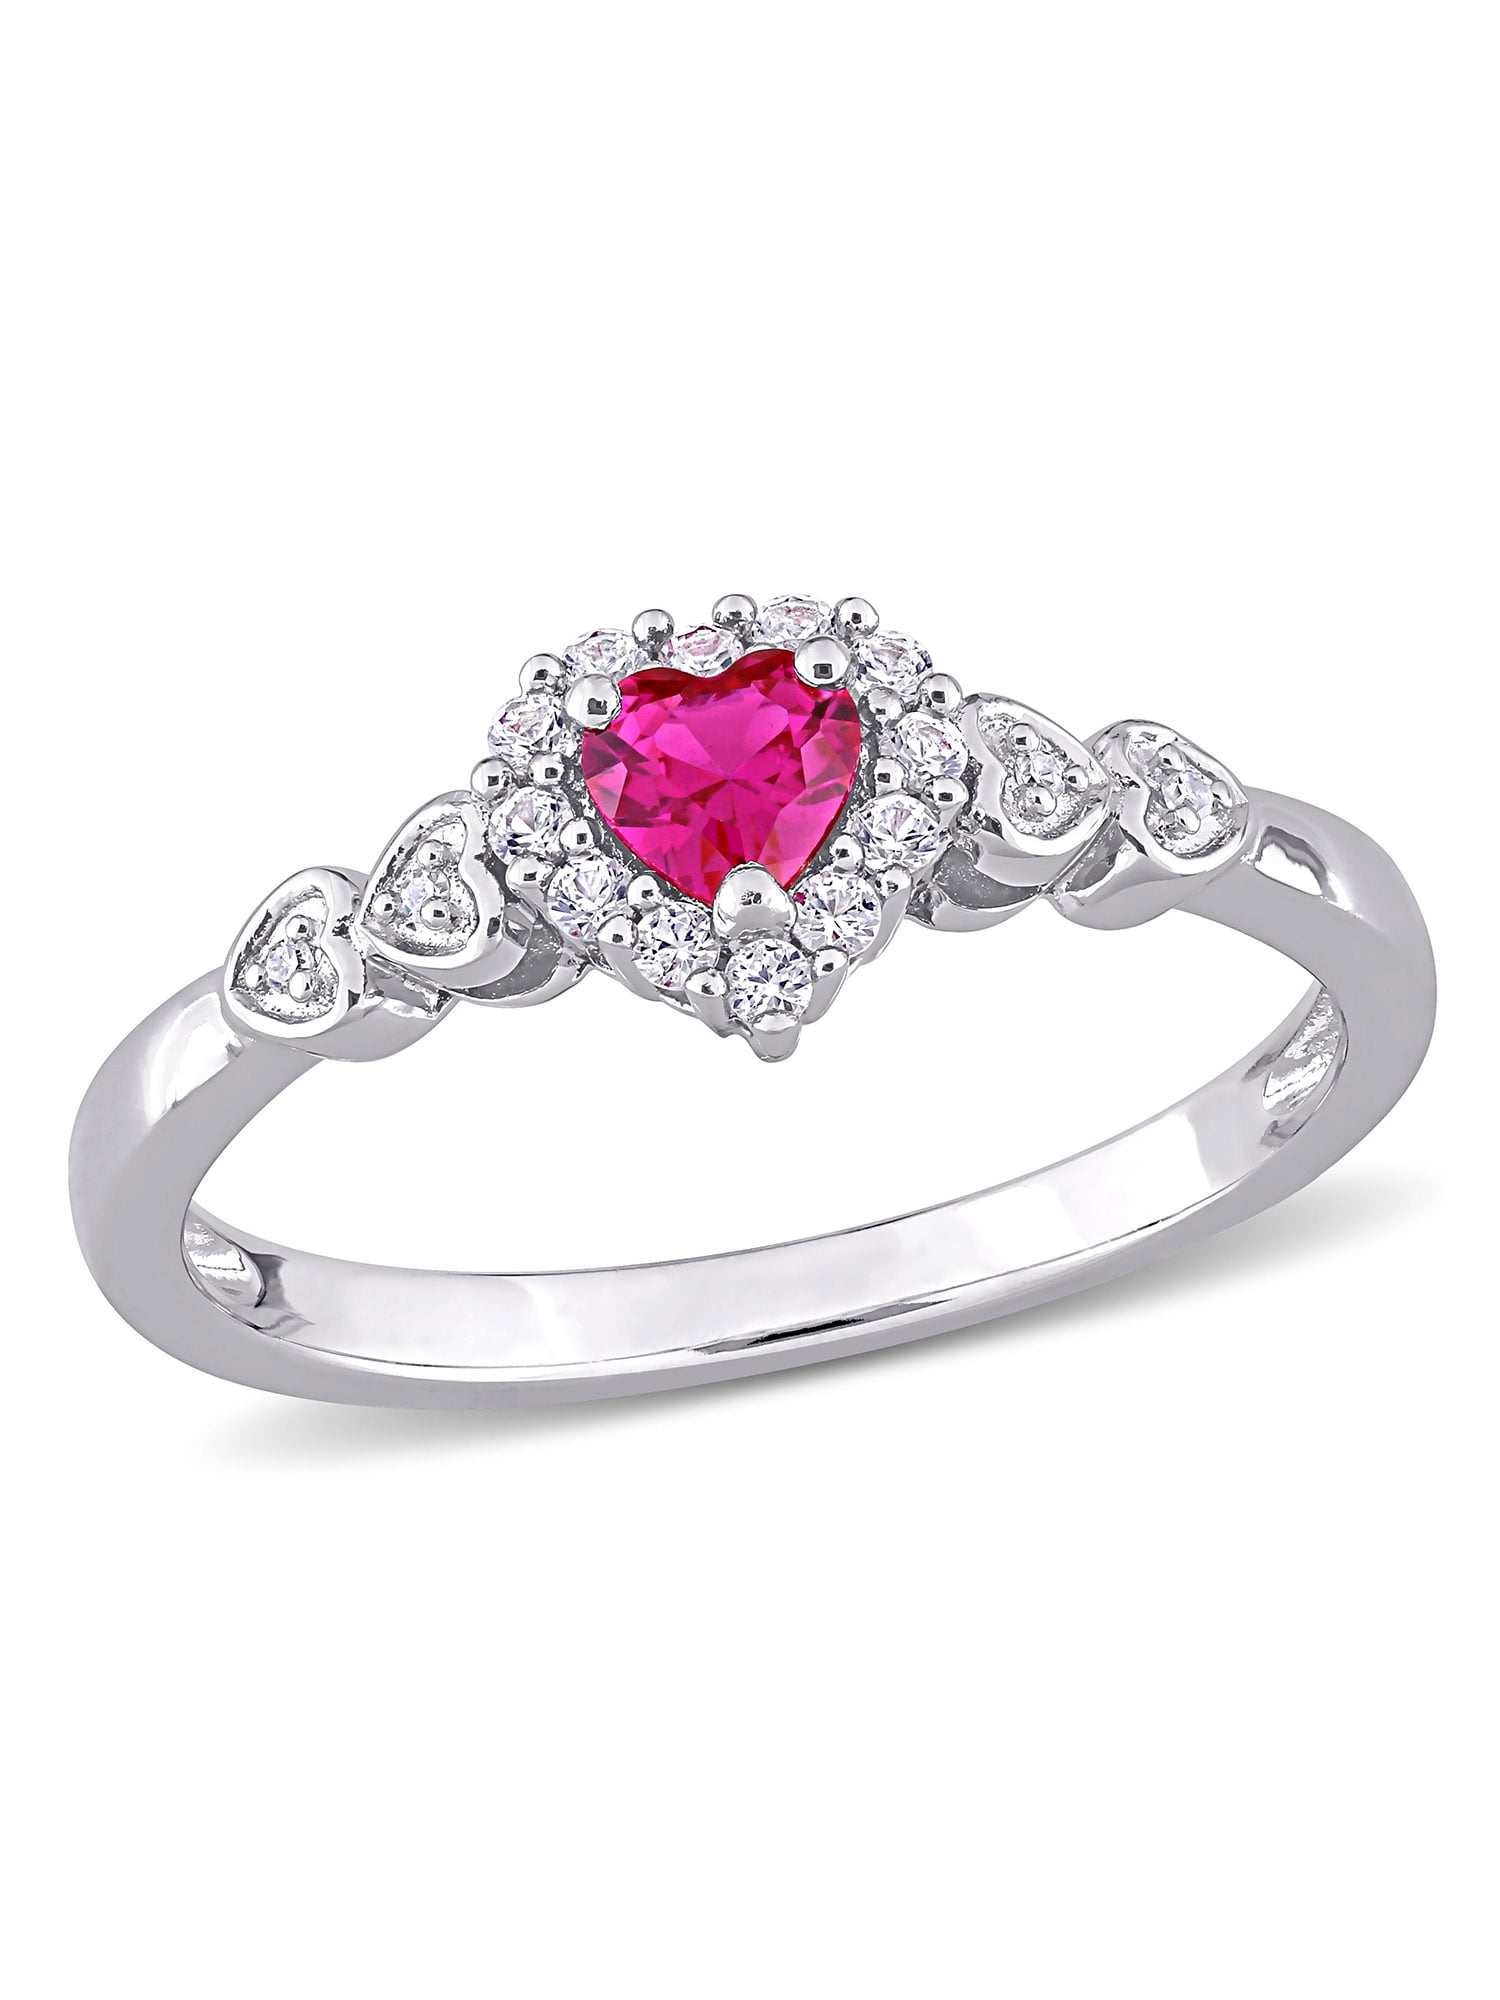 14K Gold Heart Shaped Ruby Center Diamond Accent Ring SZ 3